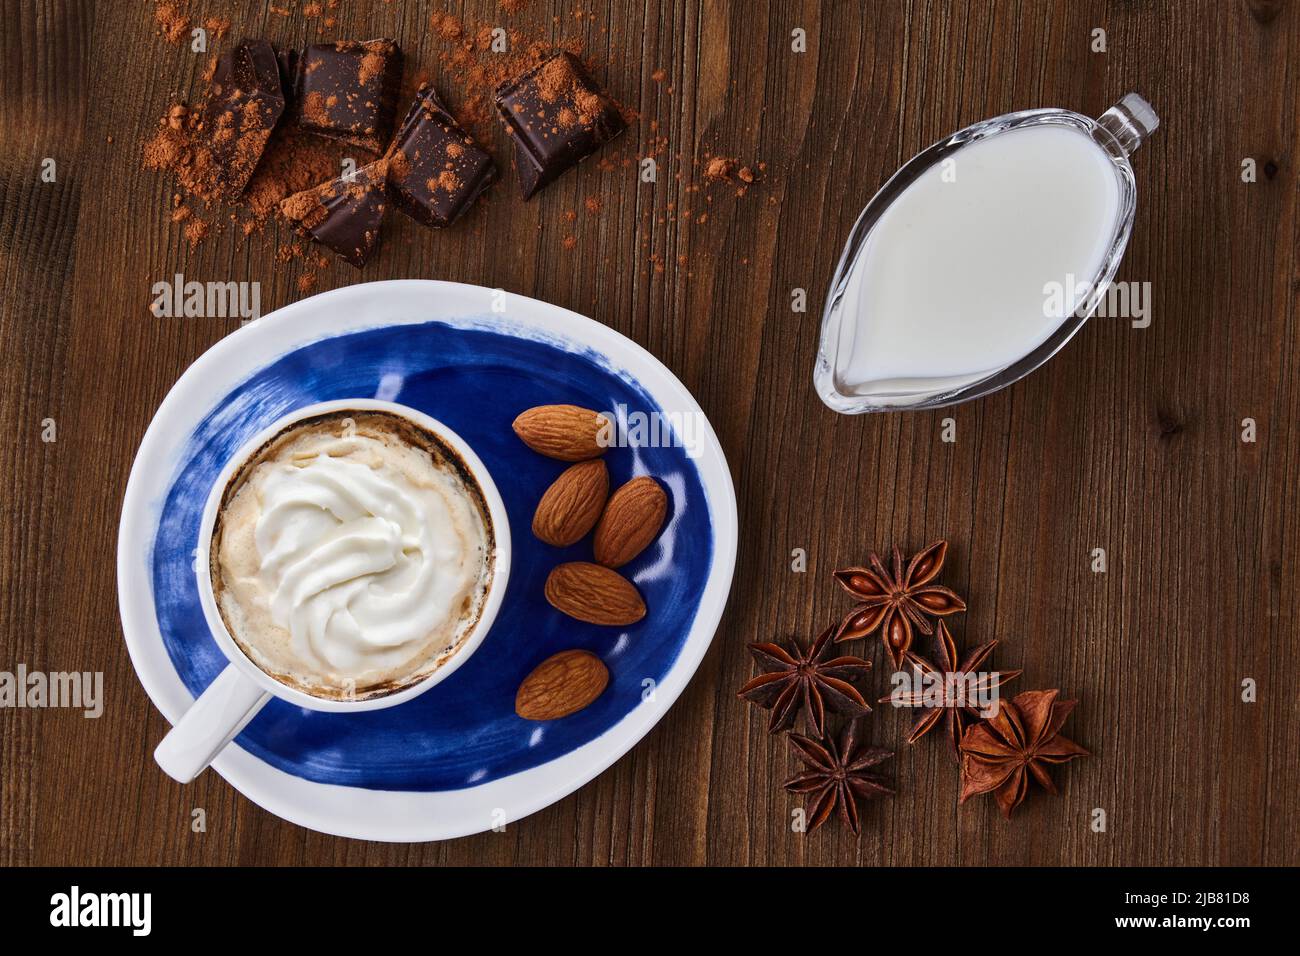 Blue cup of Viennese coffee with cream, chocolate and spices on a dark wooden table Stock Photo